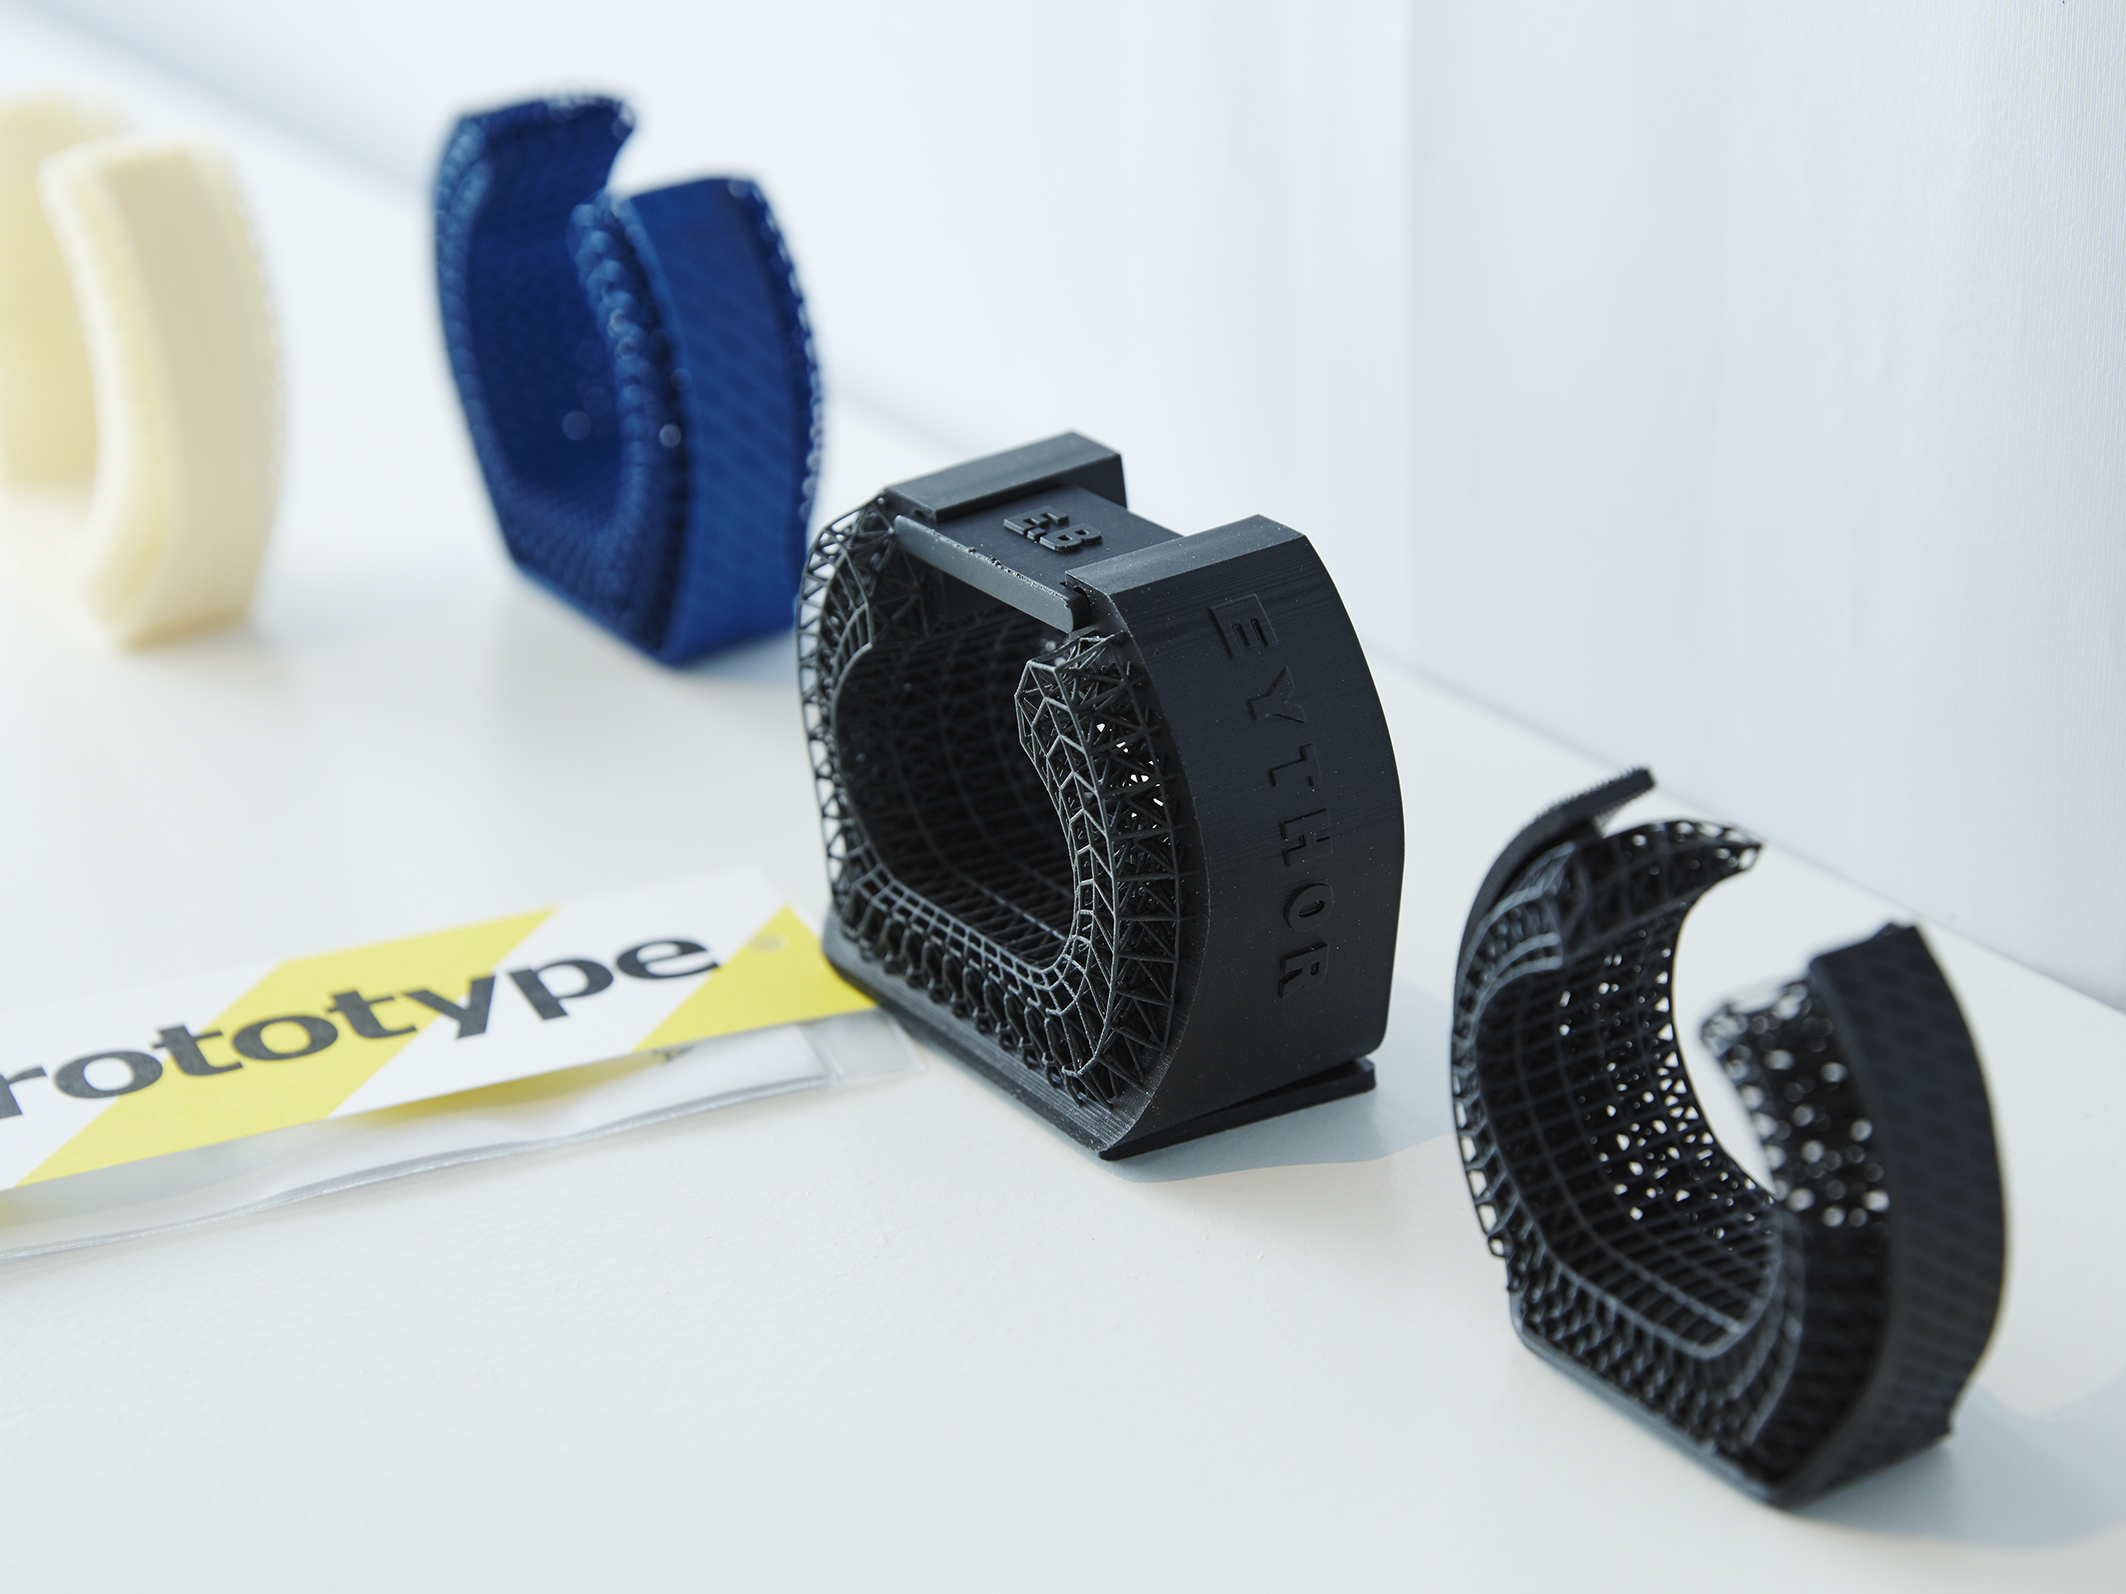 3D printed customised accessories for gamers - MaterialDistrict